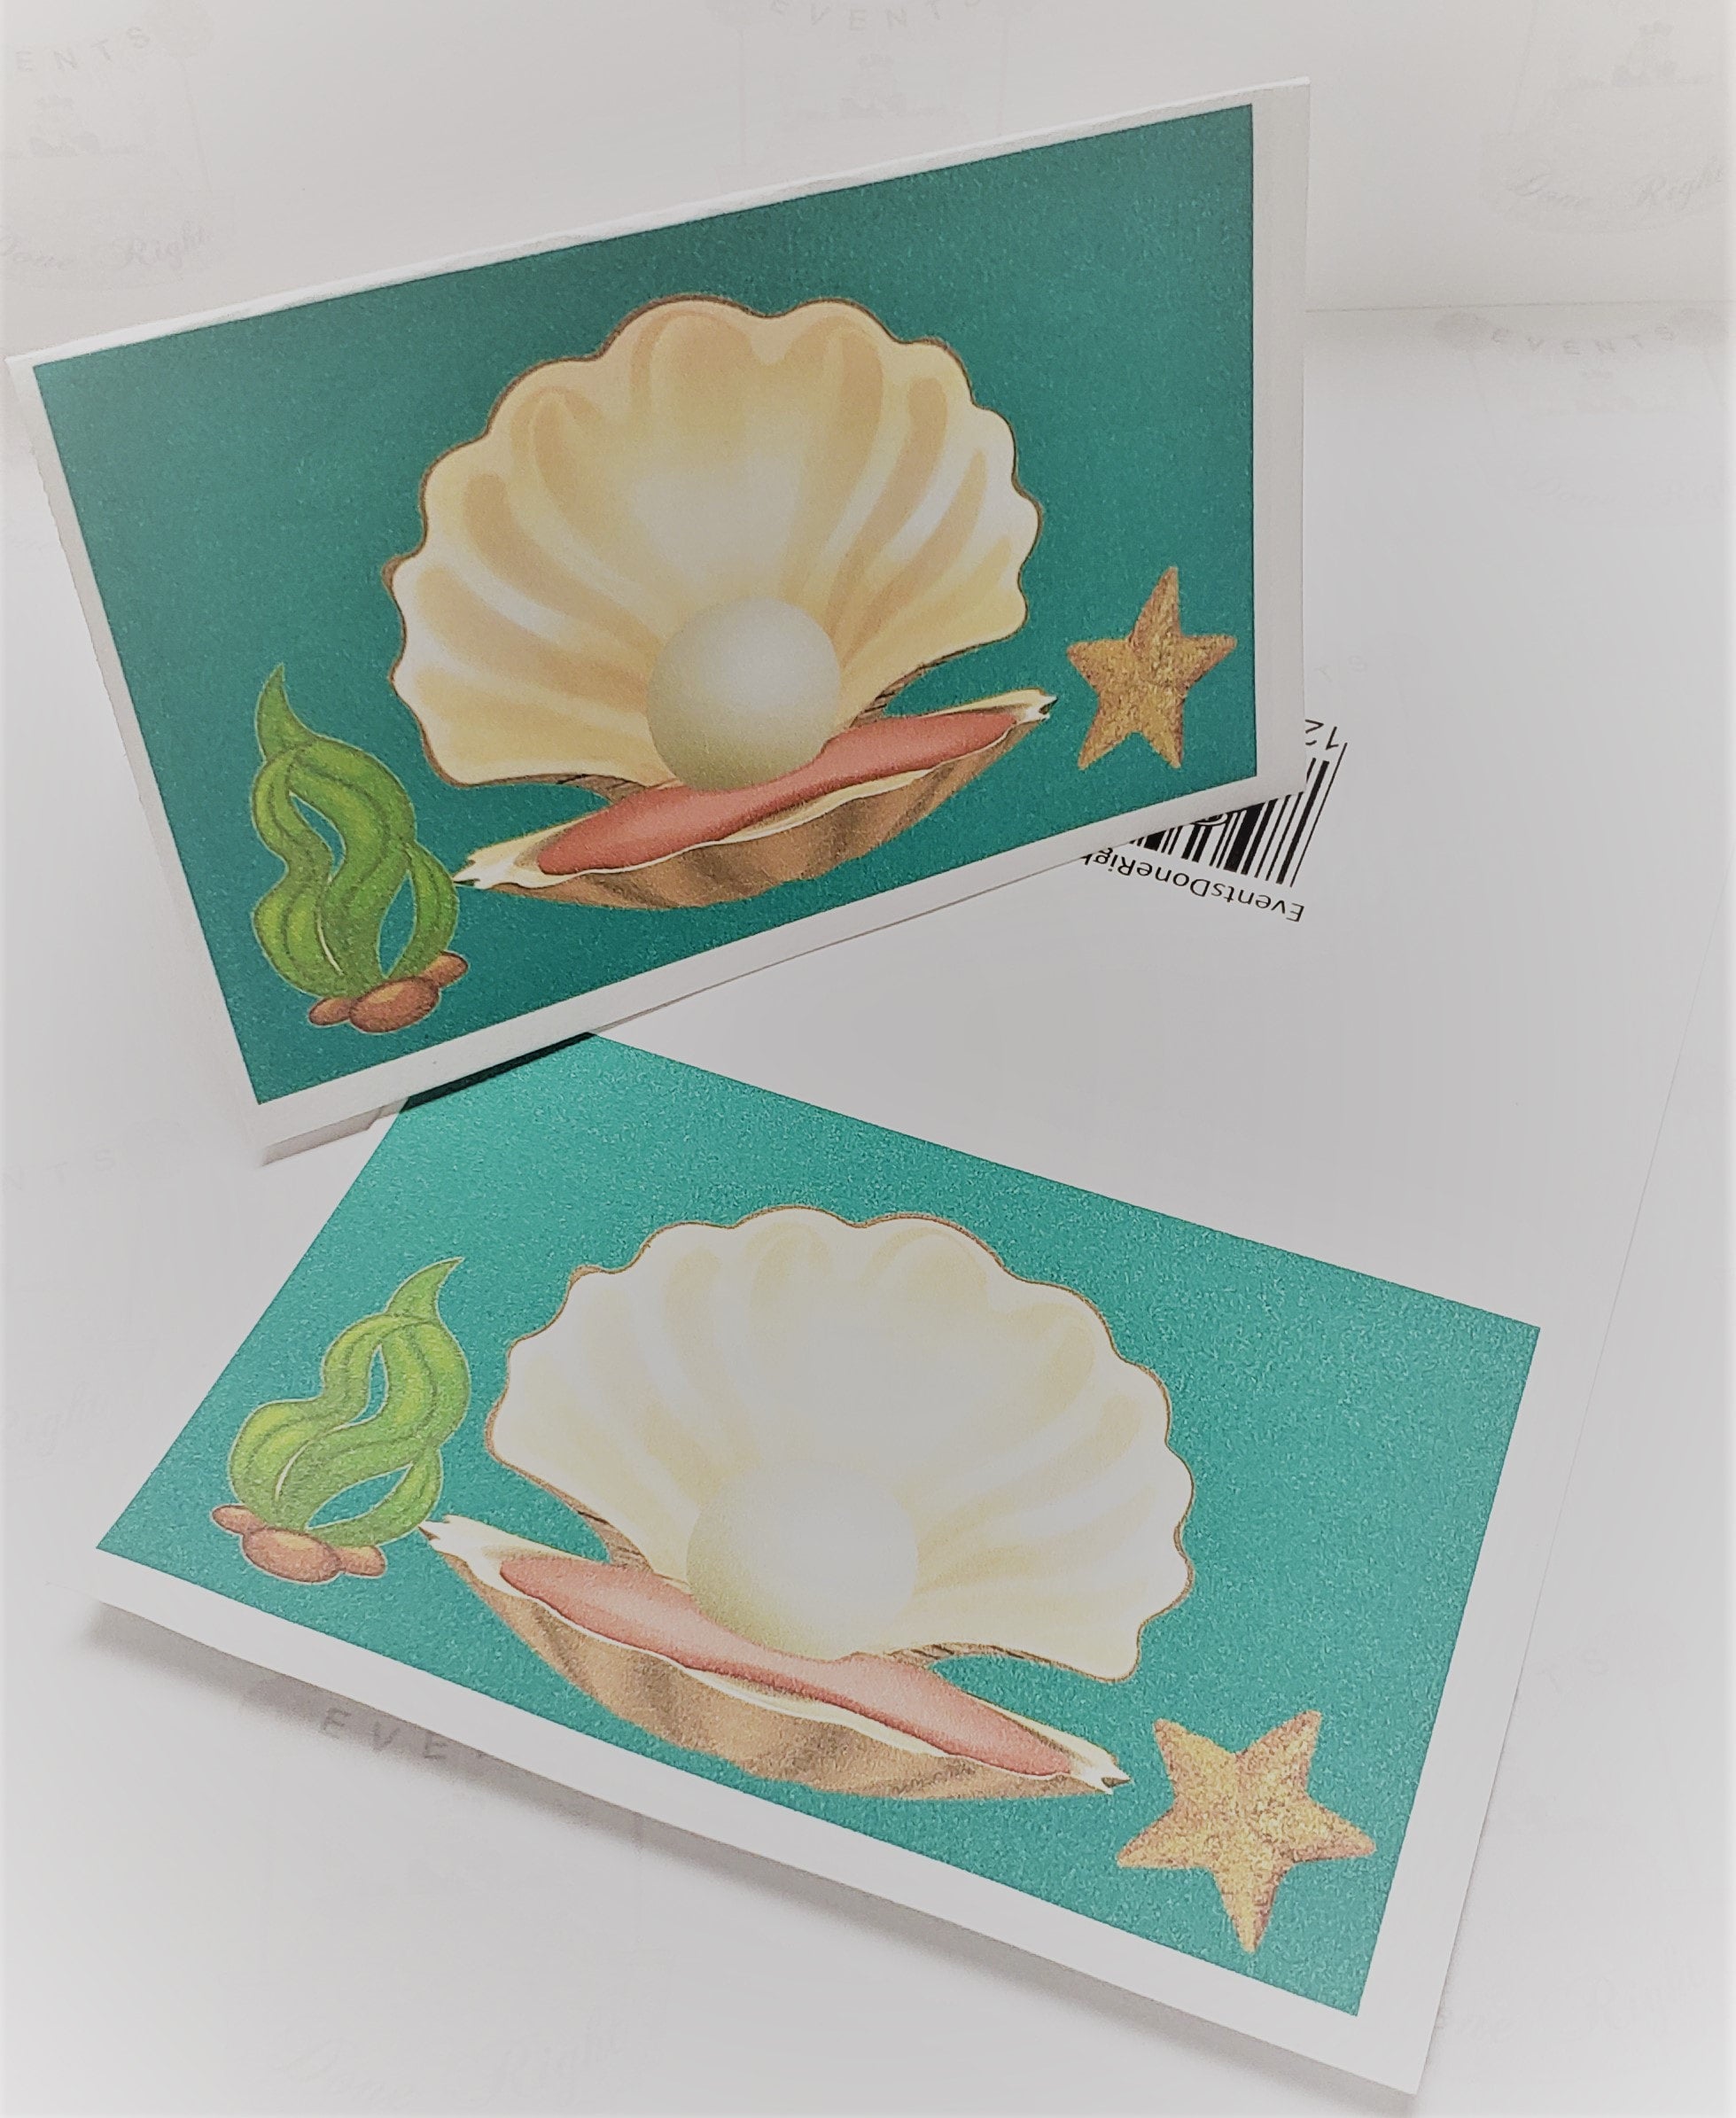 Mermaid Under the Sea Theme Food Tent Cards Treat Cards Place Cards Tail  Scales Seaweed Shells Pearl Seahorse Starfish Bubbles Rocks baby shower 1st  birthday party decorations supplies. Set of 8